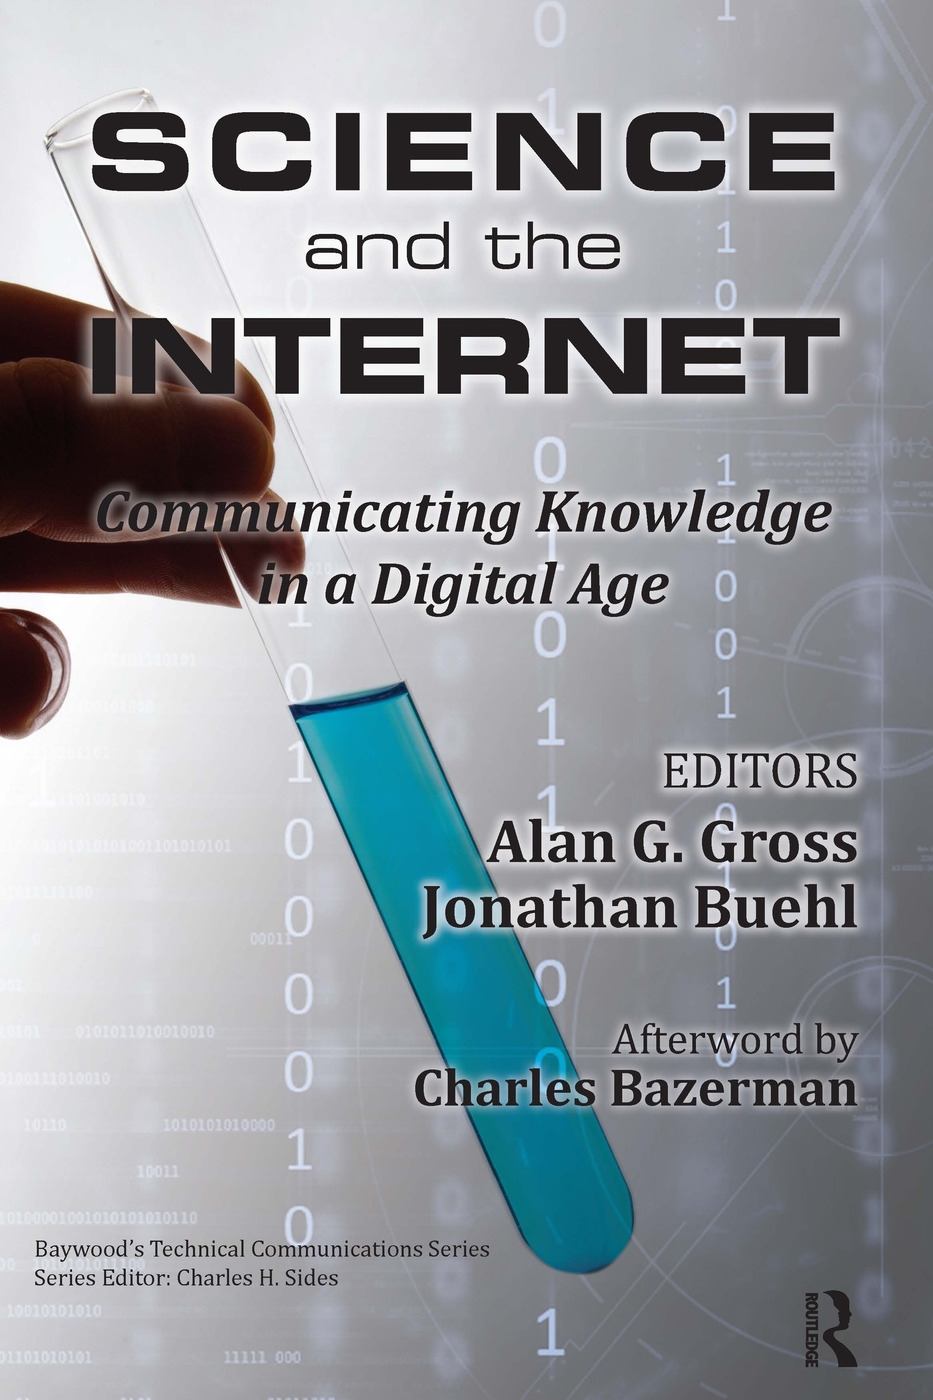 Science and the Internet: Communicating Knowledge in a Digital Age